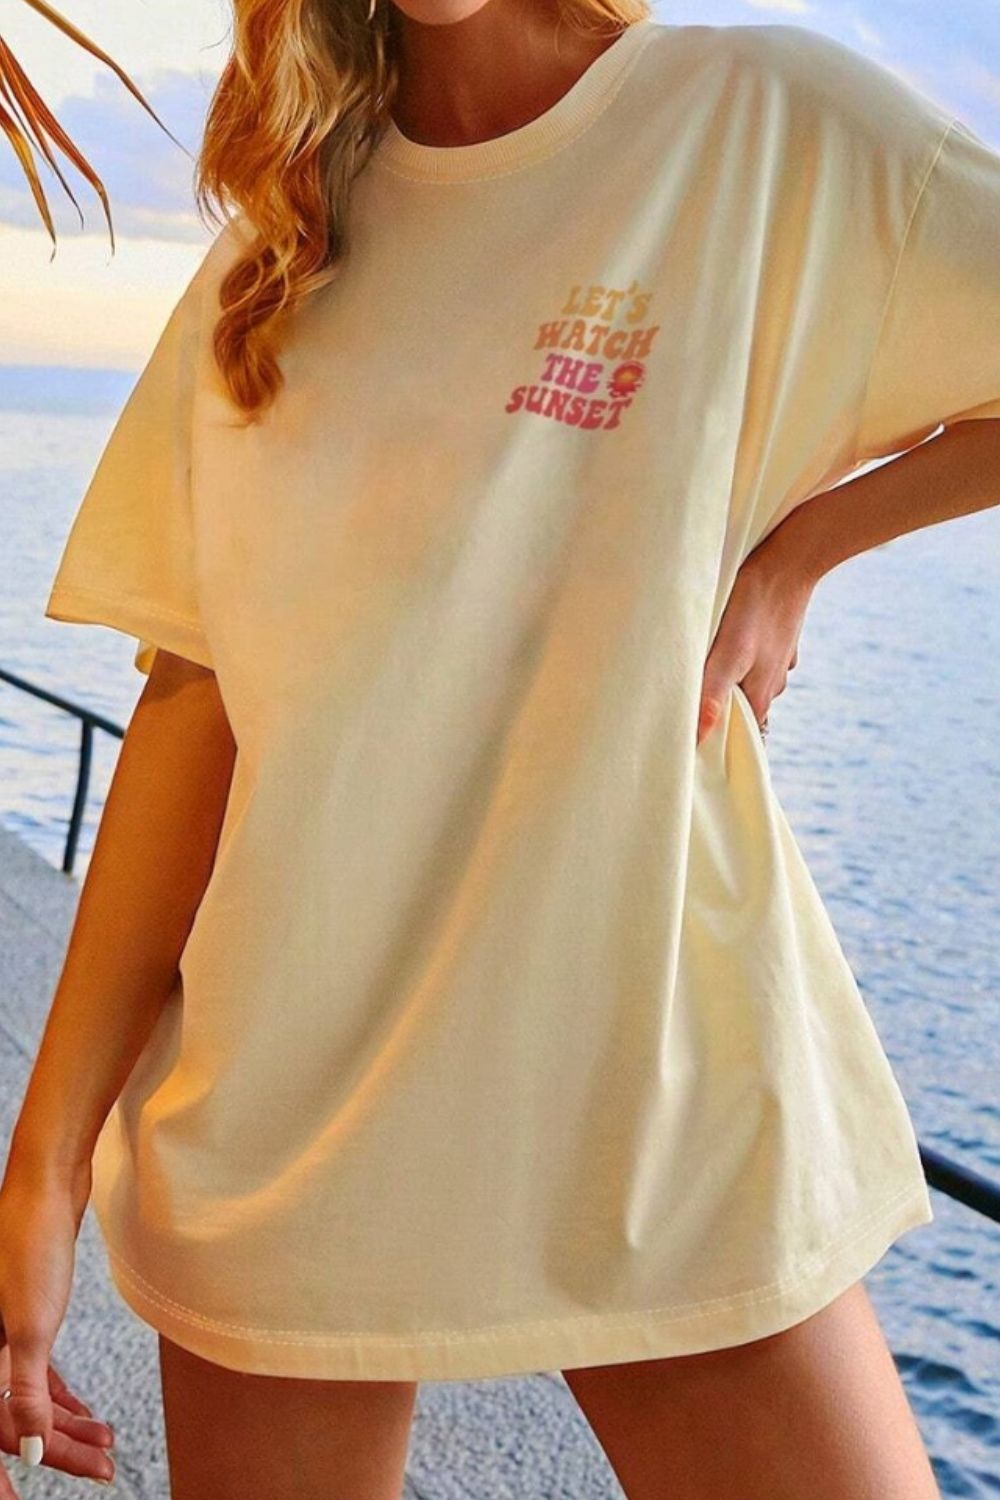 Lets Watch The Sunset Tee